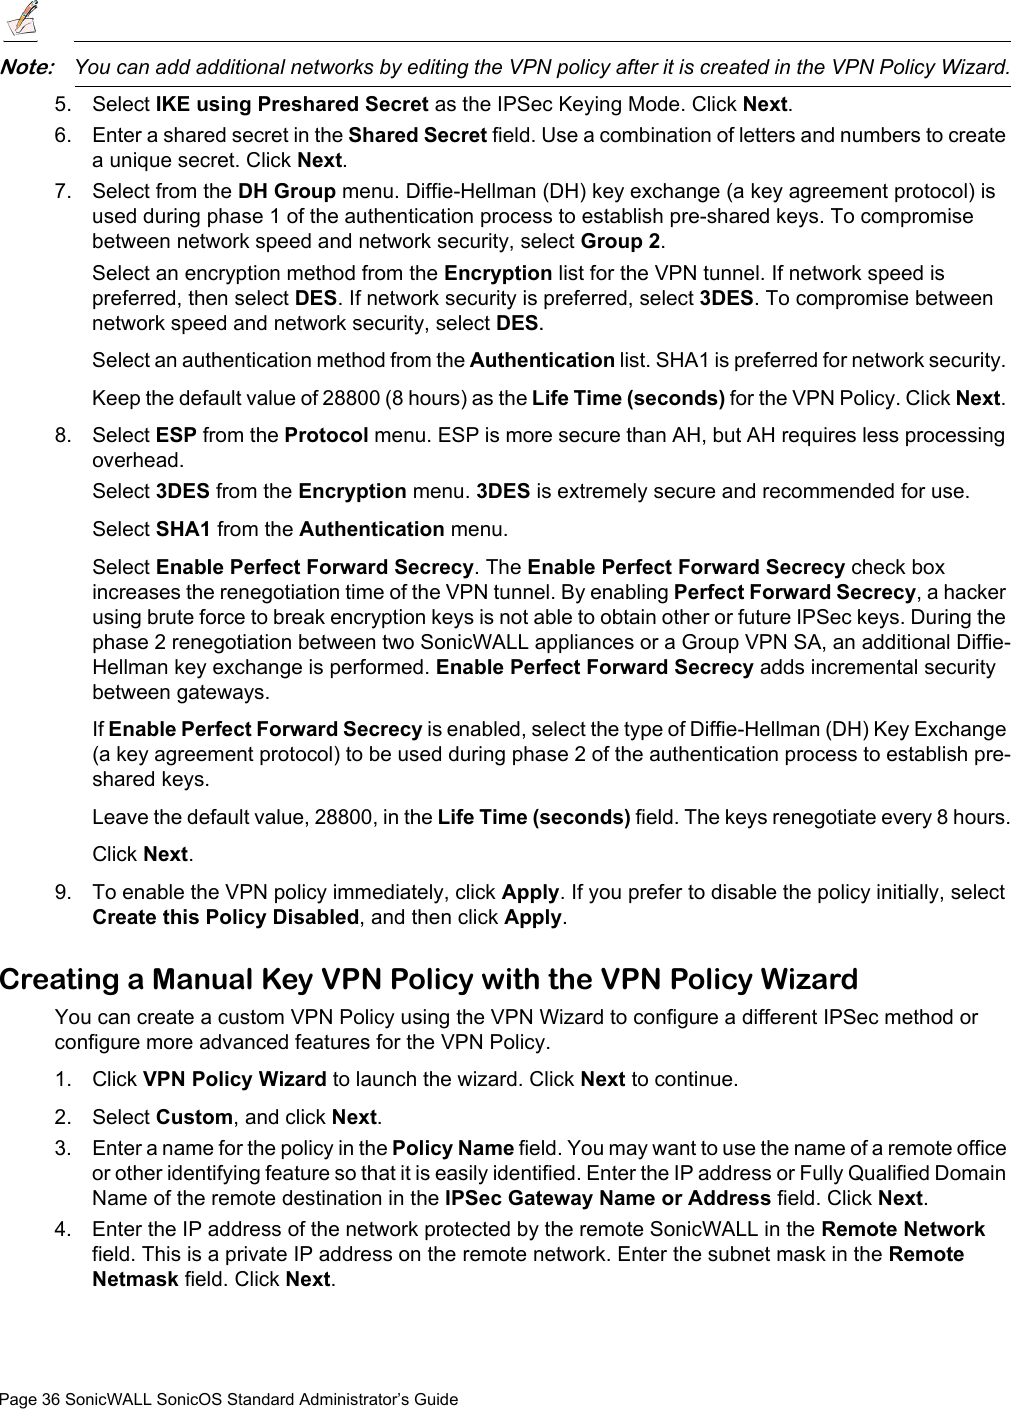 Page 36 SonicWALL SonicOS Standard Administrator’s GuideNote:You can add additional networks by editing the VPN policy after it is created in the VPN Policy Wizard.5. Select IKE using Preshared Secret as the IPSec Keying Mode. Click Next. 6. Enter a shared secret in the Shared Secret field. Use a combination of letters and numbers to create a unique secret. Click Next. 7. Select from the DH Group menu. Diffie-Hellman (DH) key exchange (a key agreement protocol) is used during phase 1 of the authentication process to establish pre-shared keys. To compromise between network speed and network security, select Group 2.Select an encryption method from the Encryption list for the VPN tunnel. If network speed is preferred, then select DES. If network security is preferred, select 3DES. To compromise between network speed and network security, select DES.Select an authentication method from the Authentication list. SHA1 is preferred for network security. Keep the default value of 28800 (8 hours) as the Life Time (seconds) for the VPN Policy. Click Next. 8. Select ESP from the Protocol menu. ESP is more secure than AH, but AH requires less processing overhead.Select 3DES from the Encryption menu. 3DES is extremely secure and recommended for use. Select SHA1 from the Authentication menu. Select Enable Perfect Forward Secrecy. The Enable Perfect Forward Secrecy check box increases the renegotiation time of the VPN tunnel. By enabling Perfect Forward Secrecy, a hacker using brute force to break encryption keys is not able to obtain other or future IPSec keys. During the phase 2 renegotiation between two SonicWALL appliances or a Group VPN SA, an additional Diffie-Hellman key exchange is performed. Enable Perfect Forward Secrecy adds incremental security between gateways.If Enable Perfect Forward Secrecy is enabled, select the type of Diffie-Hellman (DH) Key Exchange (a key agreement protocol) to be used during phase 2 of the authentication process to establish pre-shared keys.Leave the default value, 28800, in the Life Time (seconds) field. The keys renegotiate every 8 hours.Click Next.9. To enable the VPN policy immediately, click Apply. If you prefer to disable the policy initially, select Create this Policy Disabled, and then click Apply.Creating a Manual Key VPN Policy with the VPN Policy WizardYou can create a custom VPN Policy using the VPN Wizard to configure a different IPSec method or configure more advanced features for the VPN Policy. 1. Click VPN Policy Wizard to launch the wizard. Click Next to continue. 2. Select Custom, and click Next. 3. Enter a name for the policy in the Policy Name field. You may want to use the name of a remote office or other identifying feature so that it is easily identified. Enter the IP address or Fully Qualified Domain Name of the remote destination in the IPSec Gateway Name or Address field. Click Next.4. Enter the IP address of the network protected by the remote SonicWALL in the Remote Network field. This is a private IP address on the remote network. Enter the subnet mask in the Remote Netmask field. Click Next.